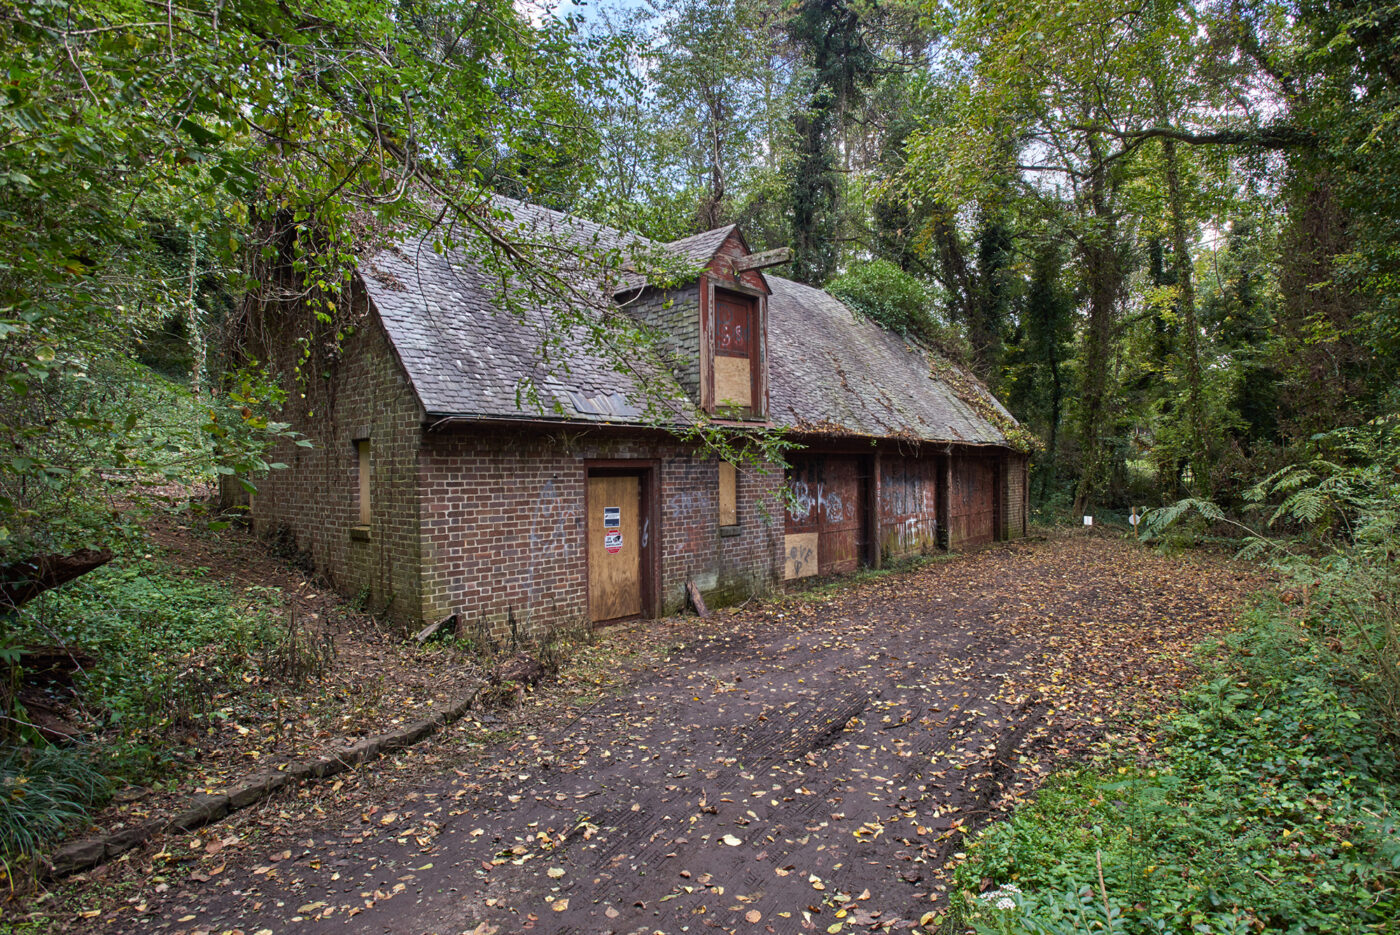 A carriage house building in pre-restoration condition sits at the end of a path in the woods.